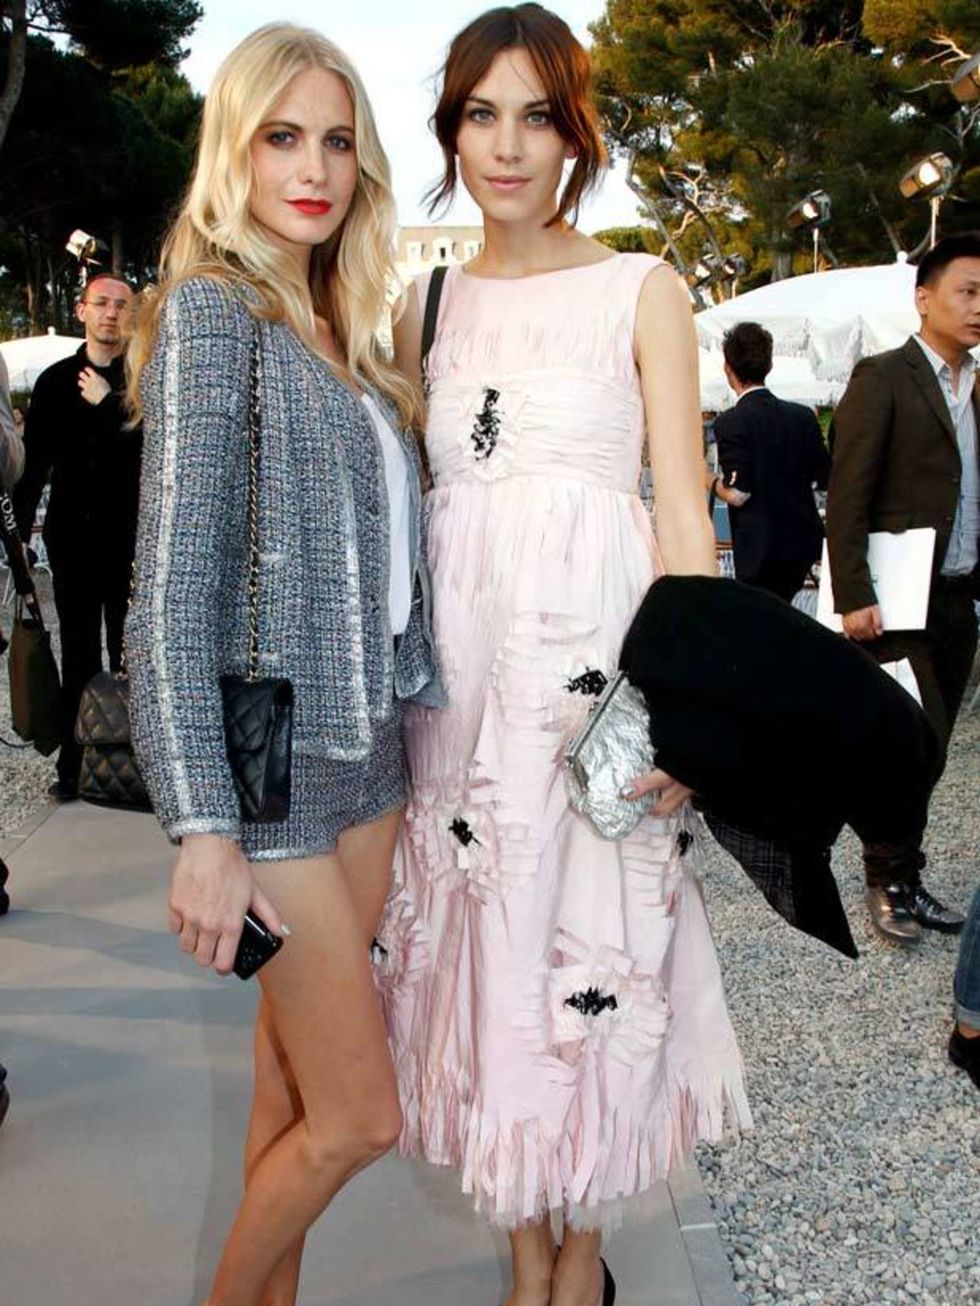 <p><a href="http://www.elleuk.com/content/search?SearchText=poppy+delevigne&amp;SearchButton=Search">Poppy Delevigne</a> &amp; <a href="http://www.elleuk.com/starstyle/style-files/(section)/alexa-chung">Alexa Chung</a> in head-to-toe <a href="http://www.e